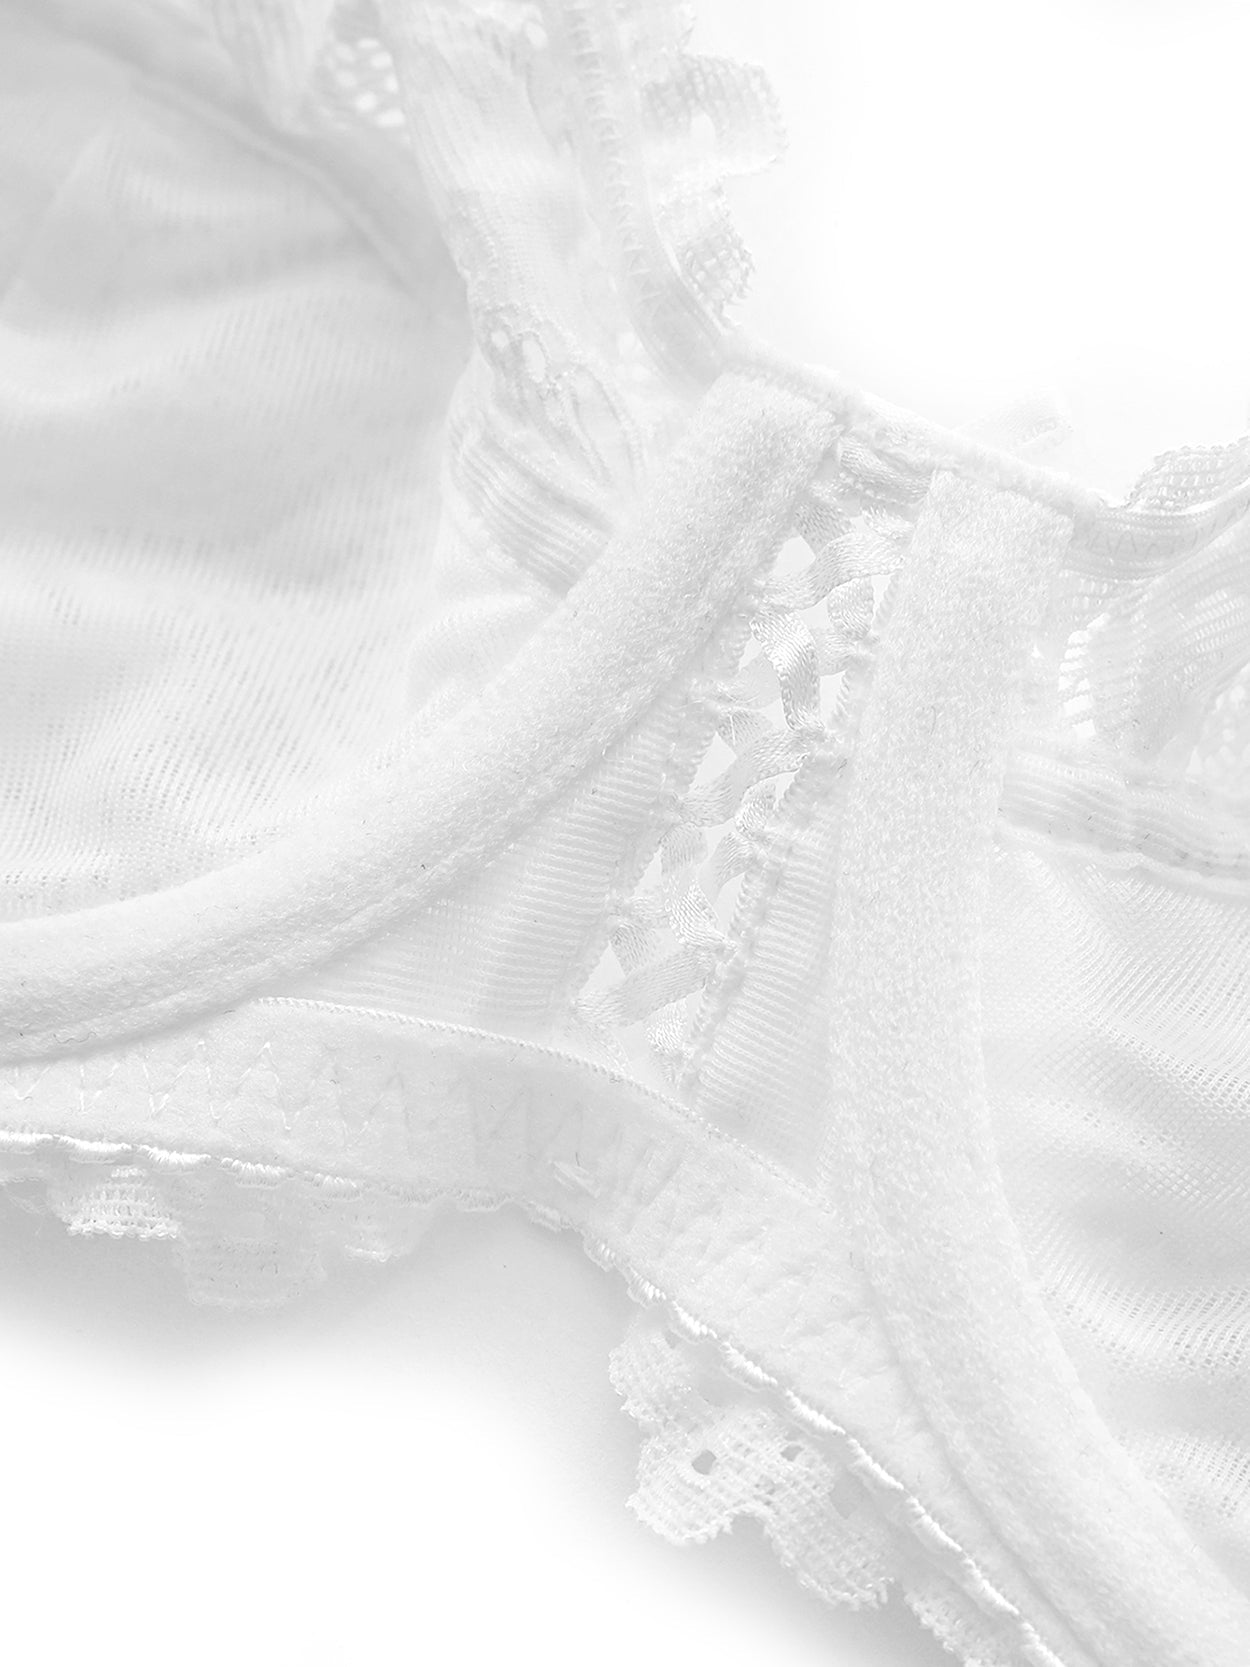 White Cotton Voile Non Padded Daily wear Bra